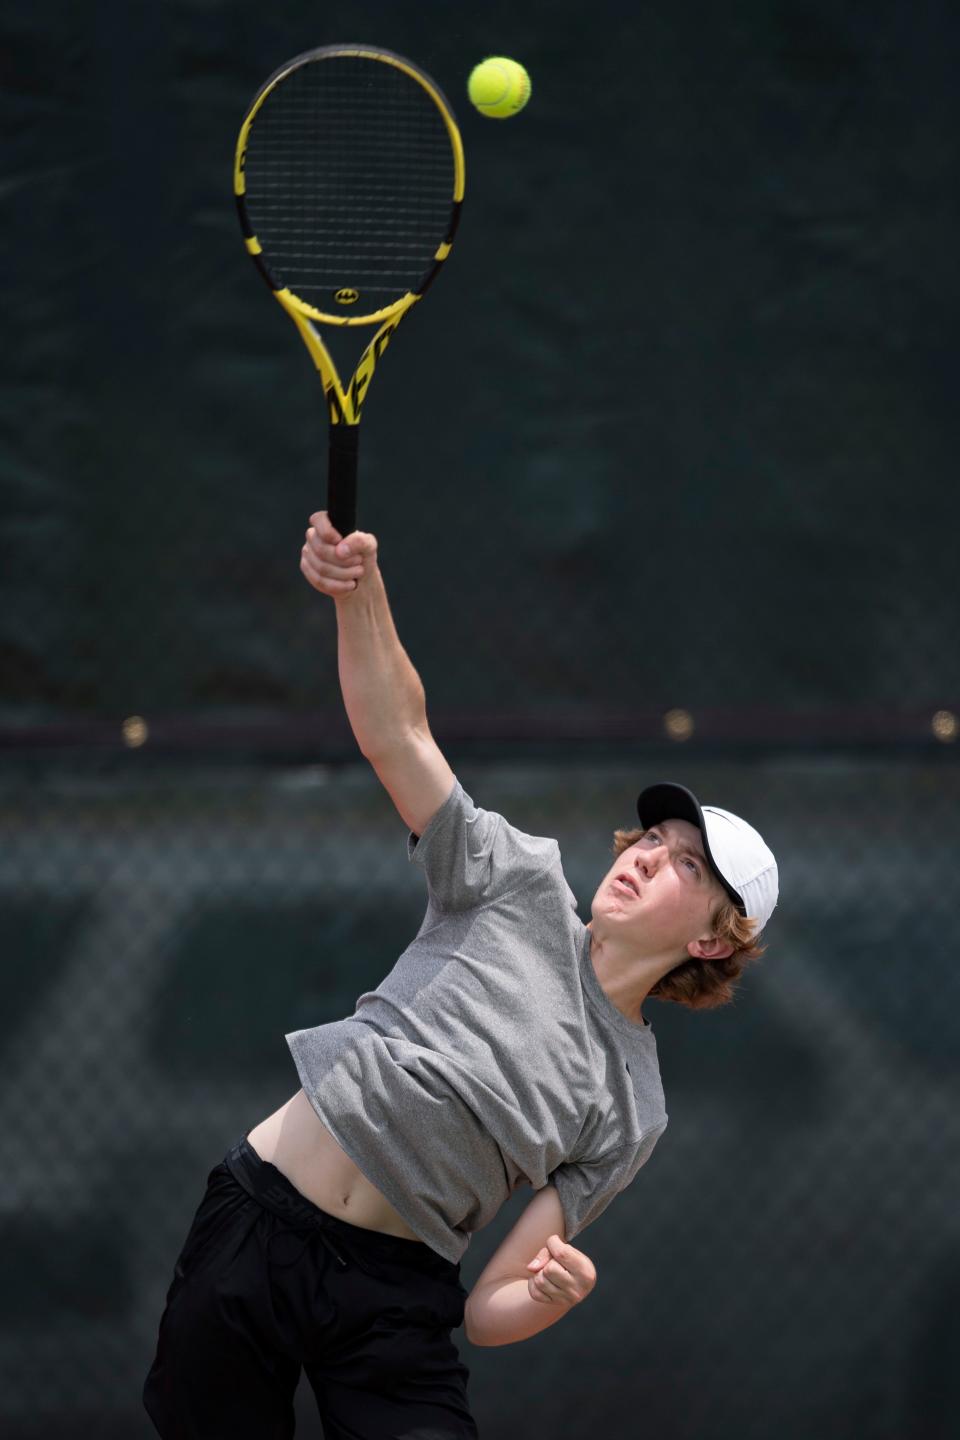 Topeka West's James Maag serves the ball at the state tournament Friday at Kossover Tennis Court.